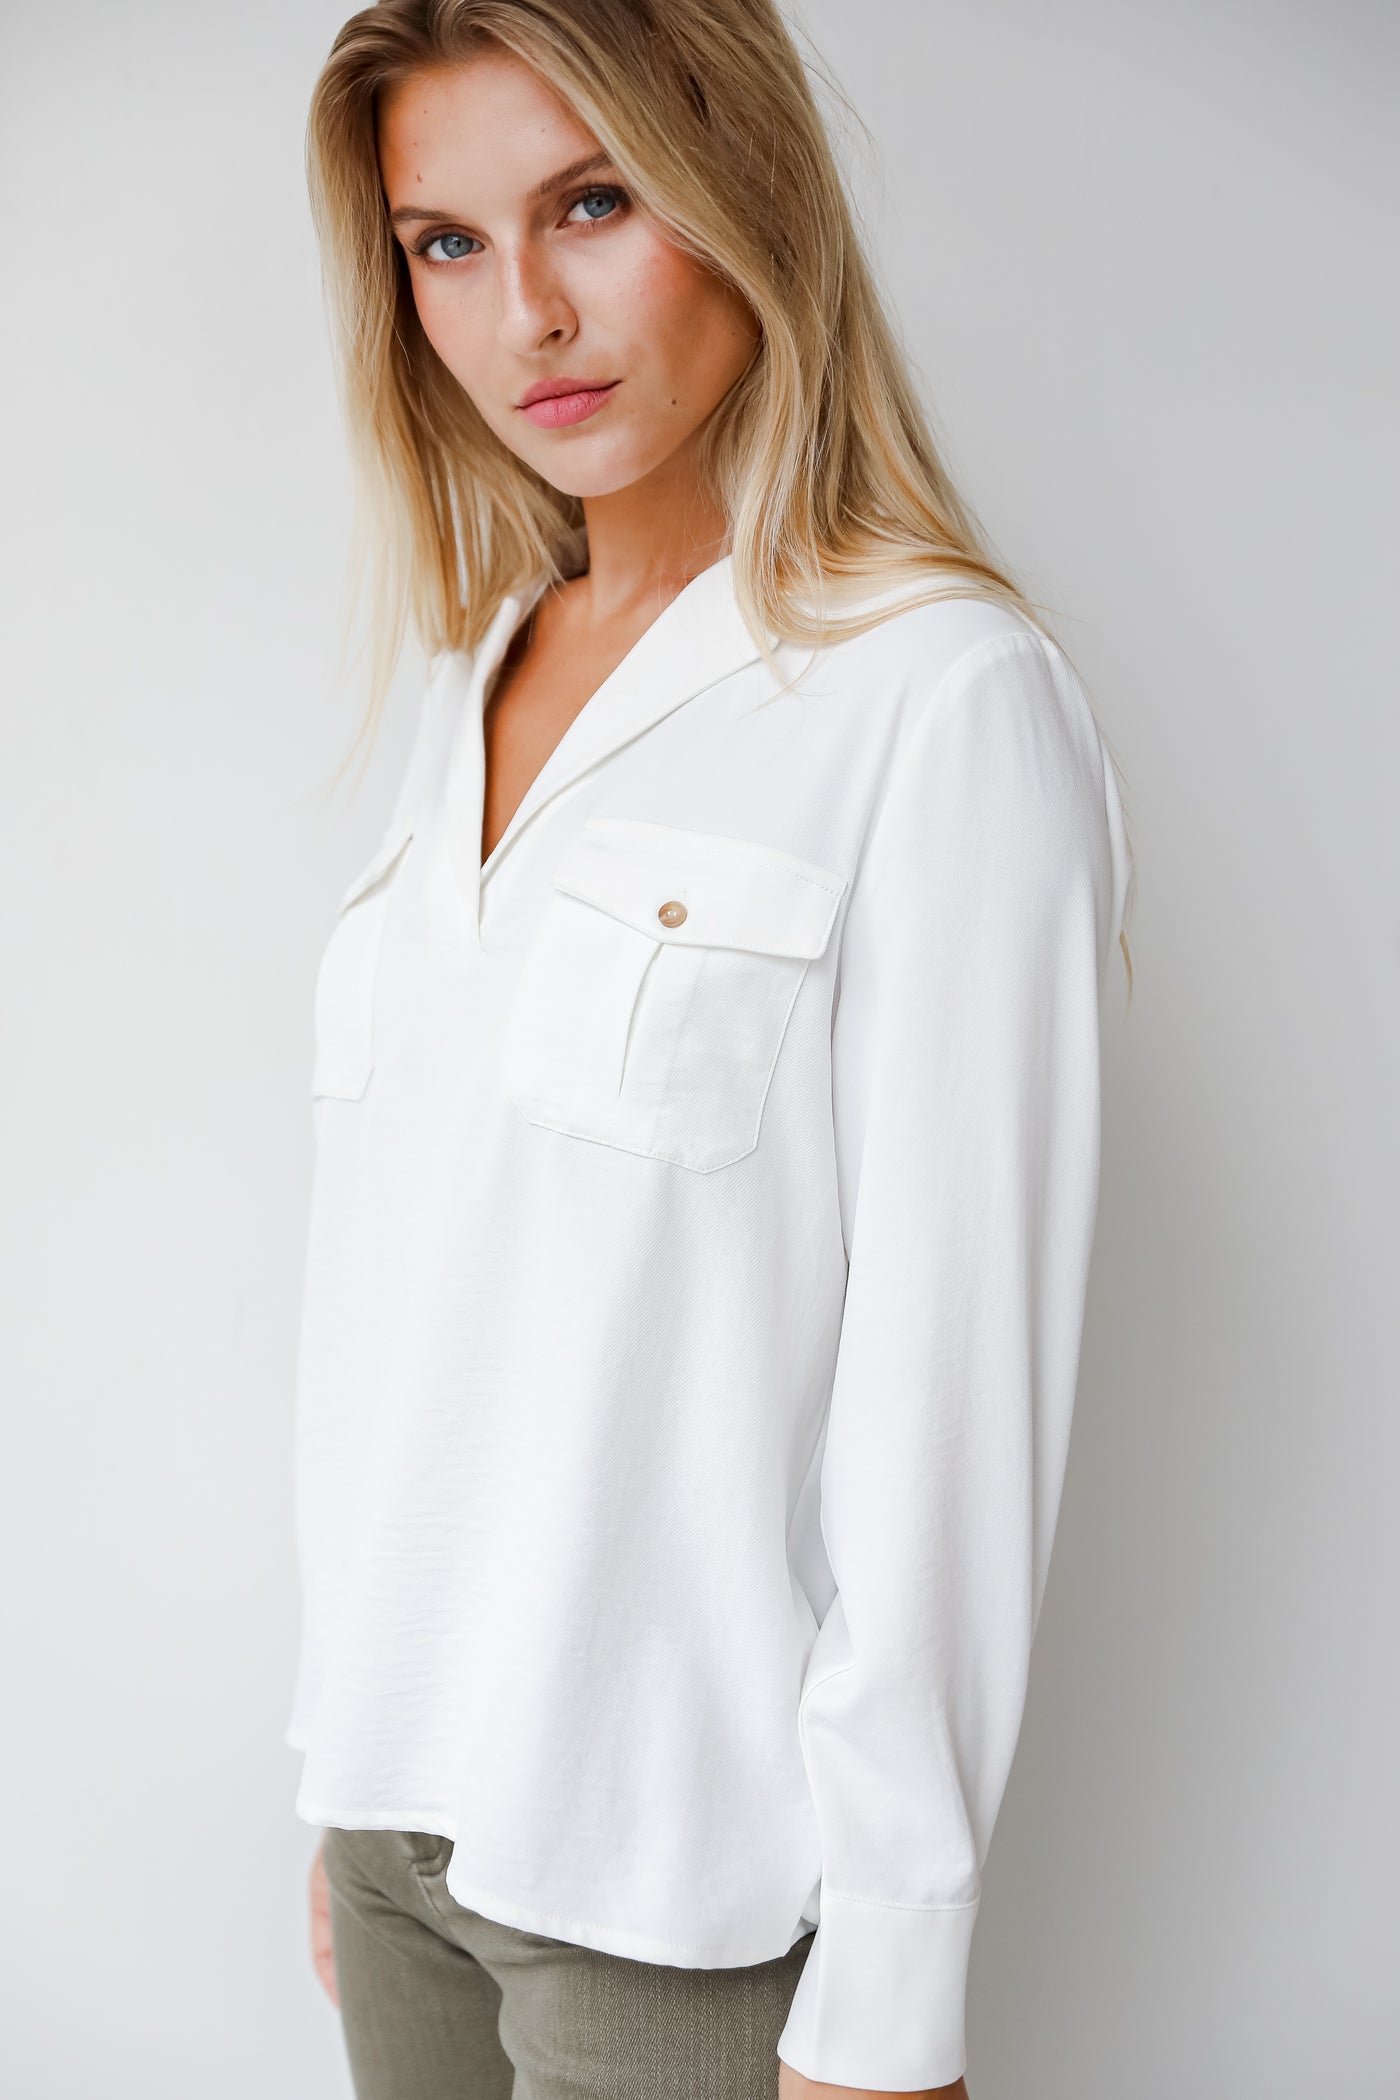 white collared blouse side view